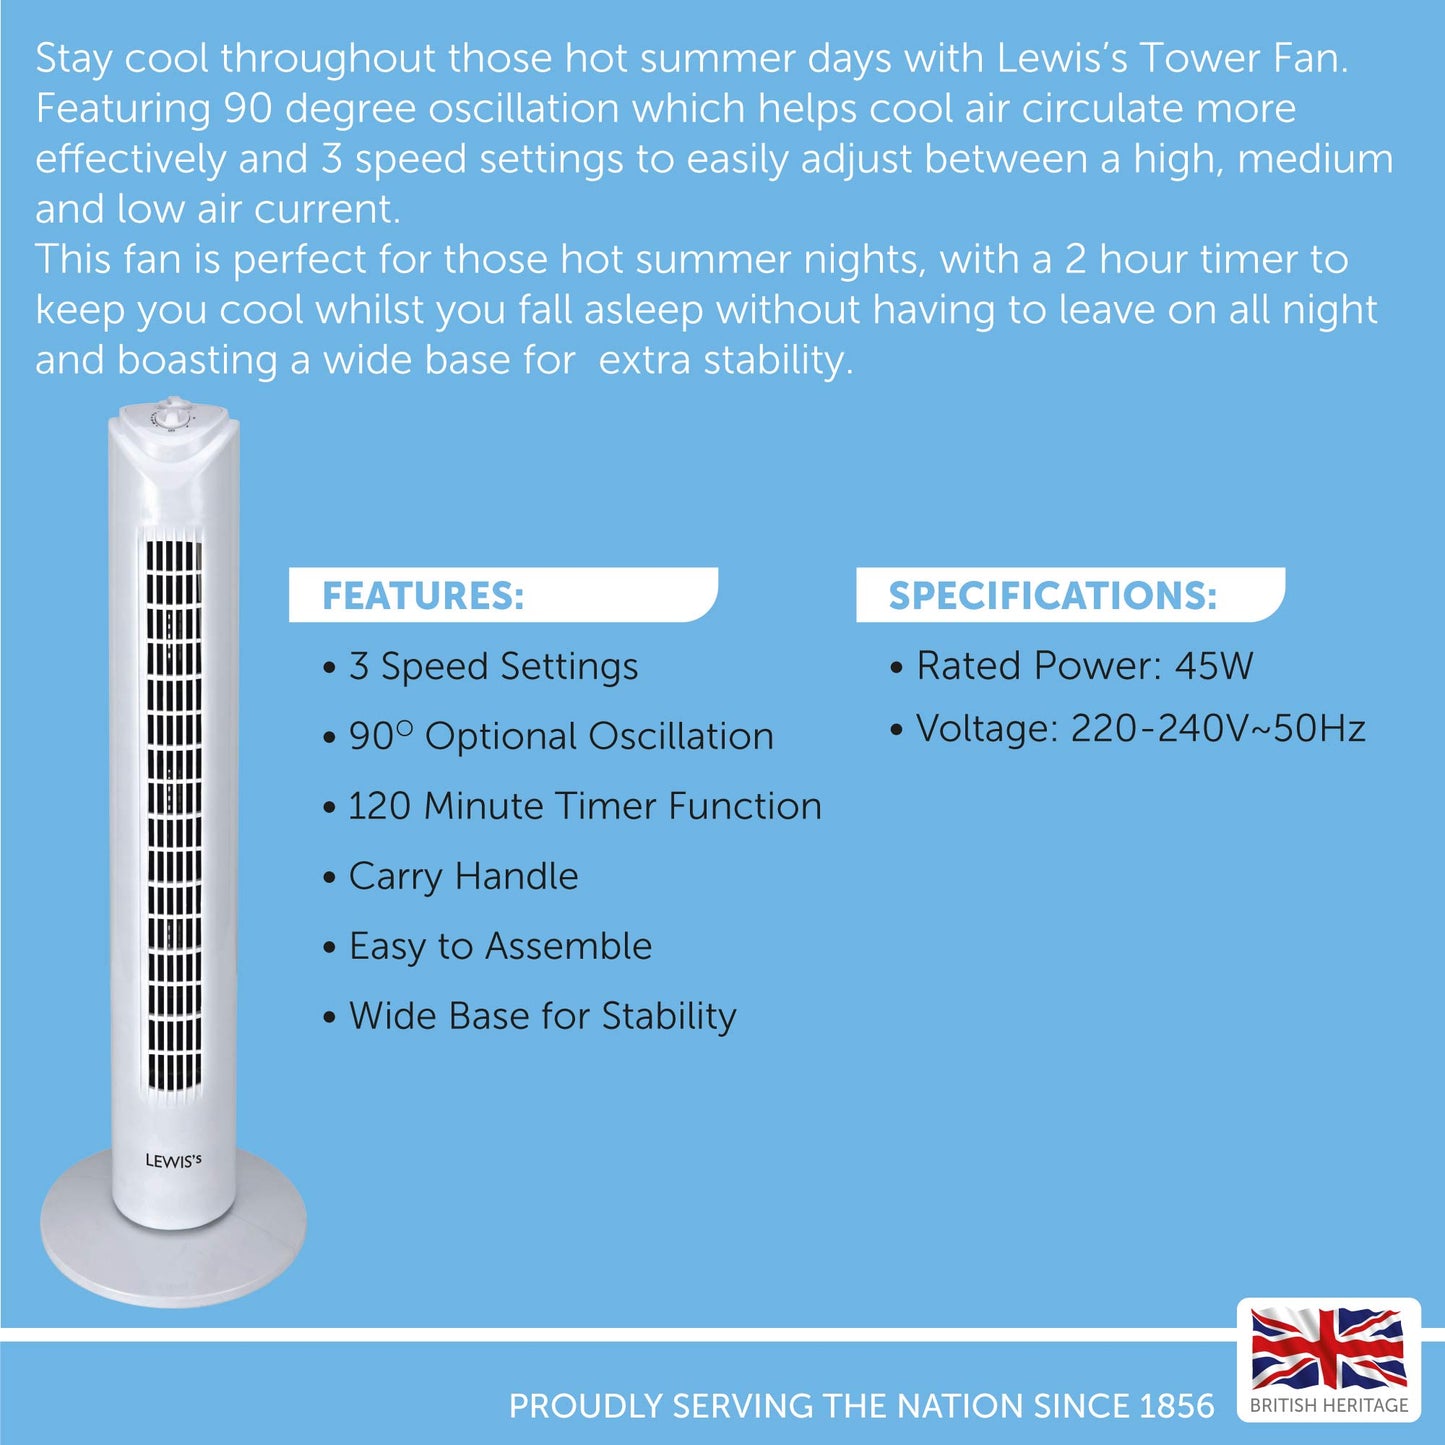 Lewis's 32 Inch Tower Fan - White